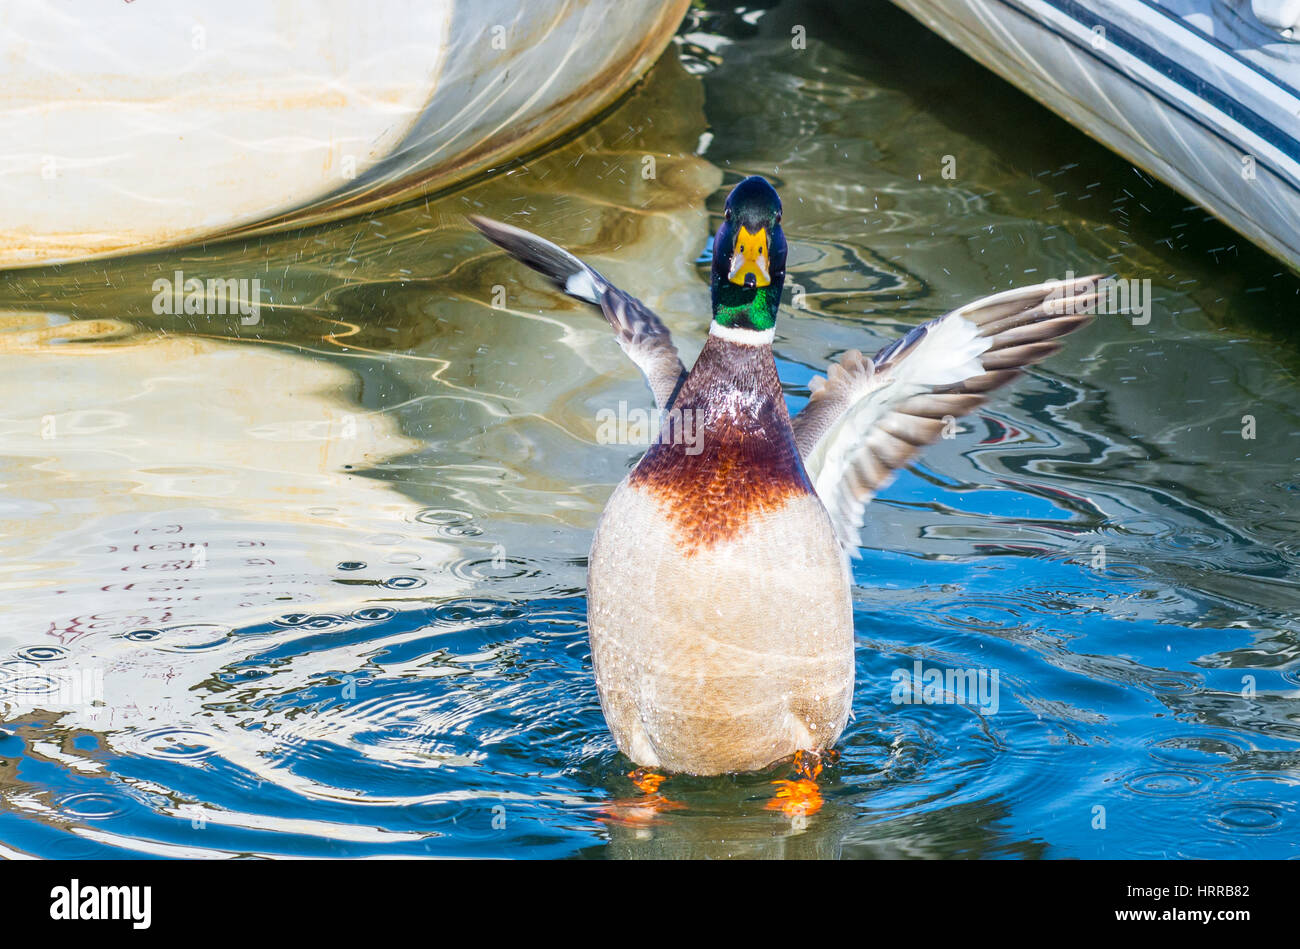 A high spirited Mallard duck flapping its wings and splashing in the sea water among small boats. Stock Photo